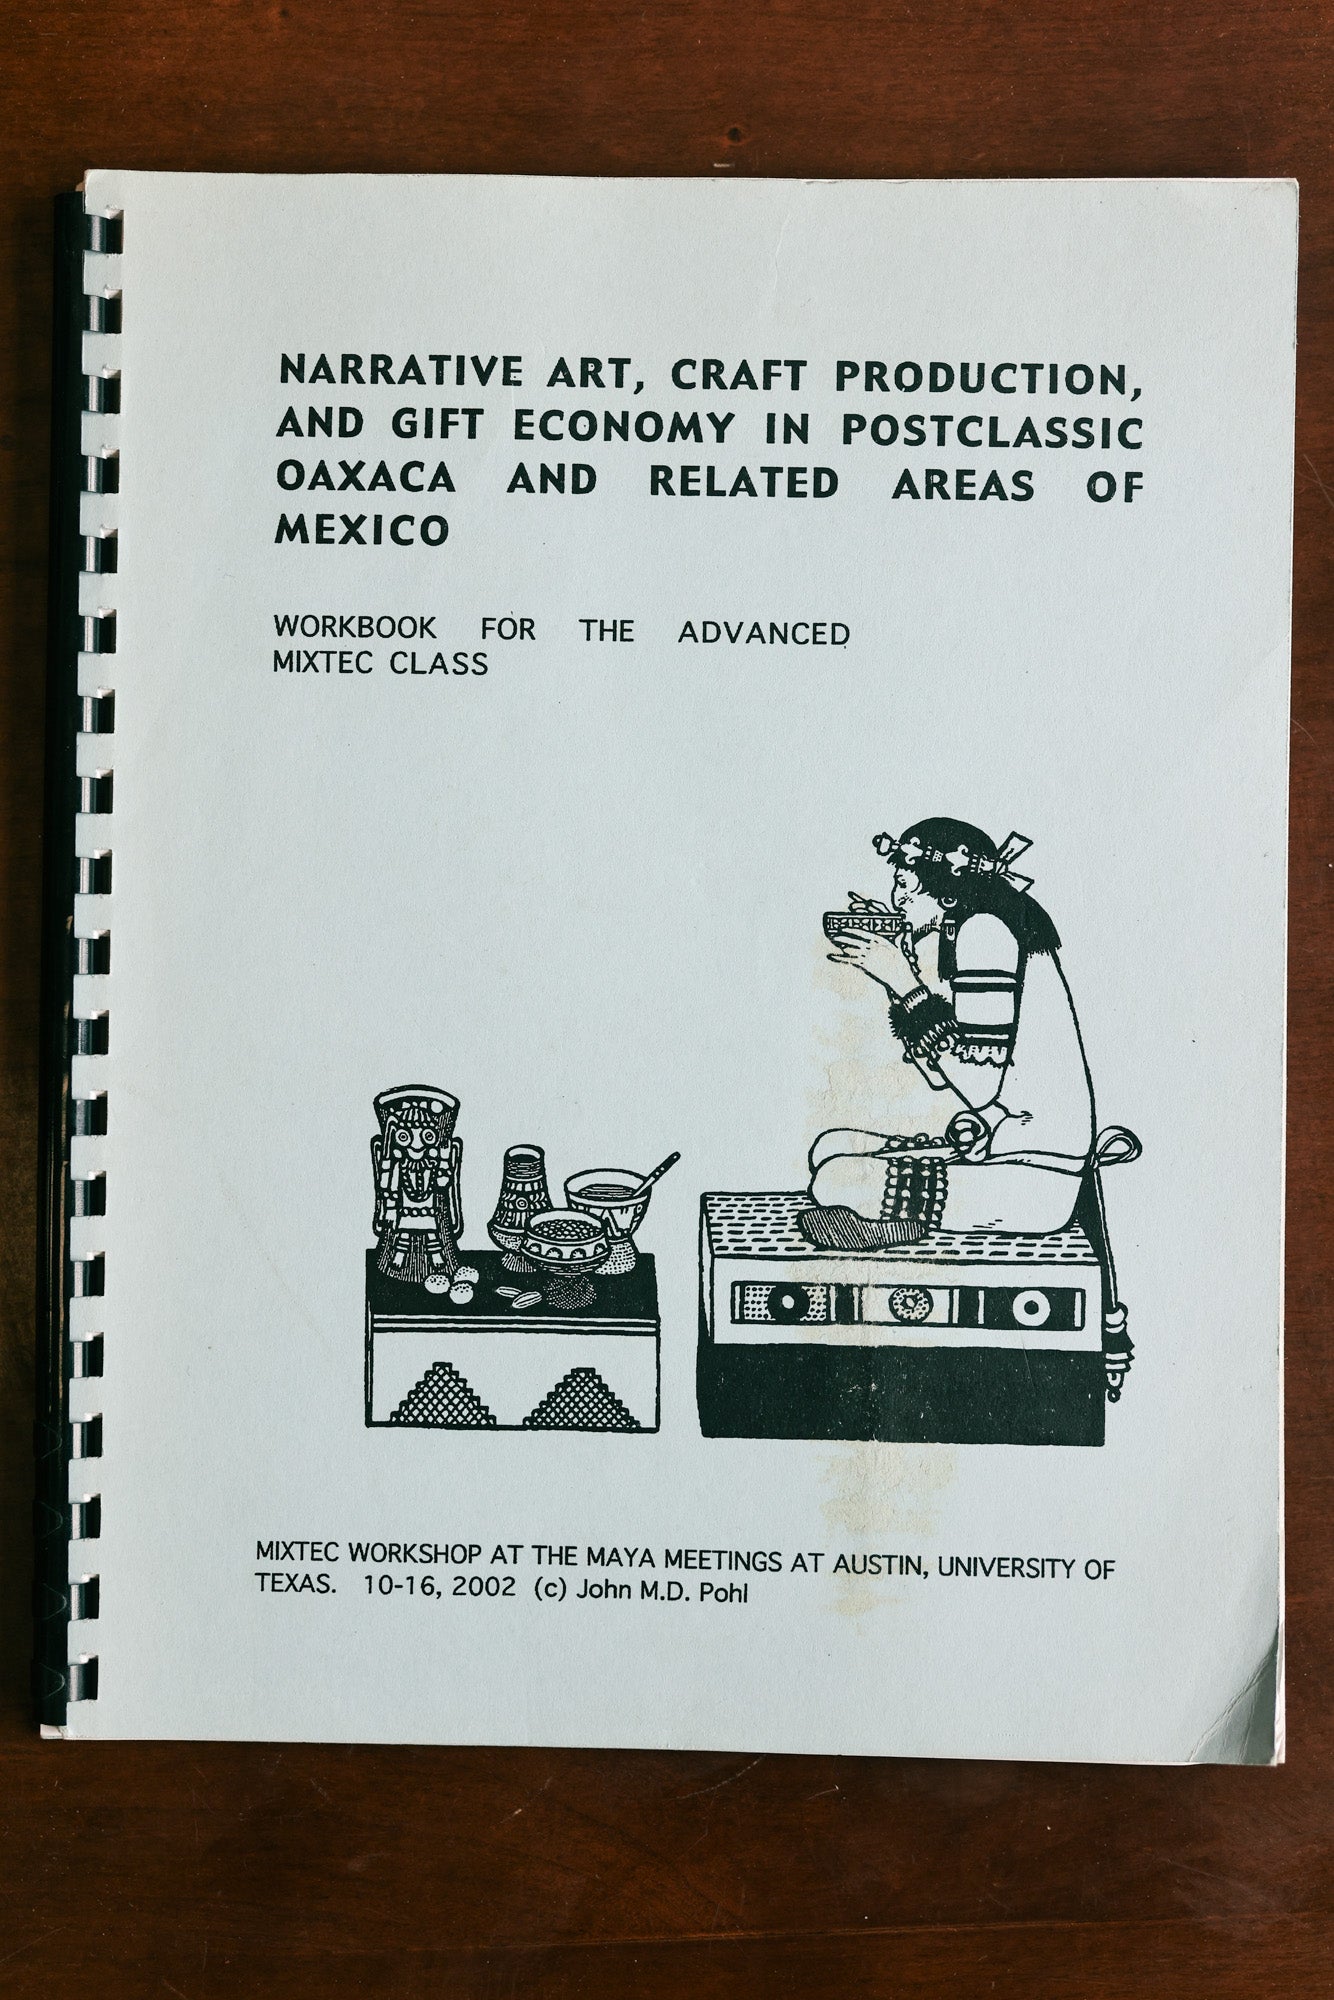  - Narrative Art, Craft Production, and Gift Economy in Postclassic Oaxaca and Related Areas of Mexico